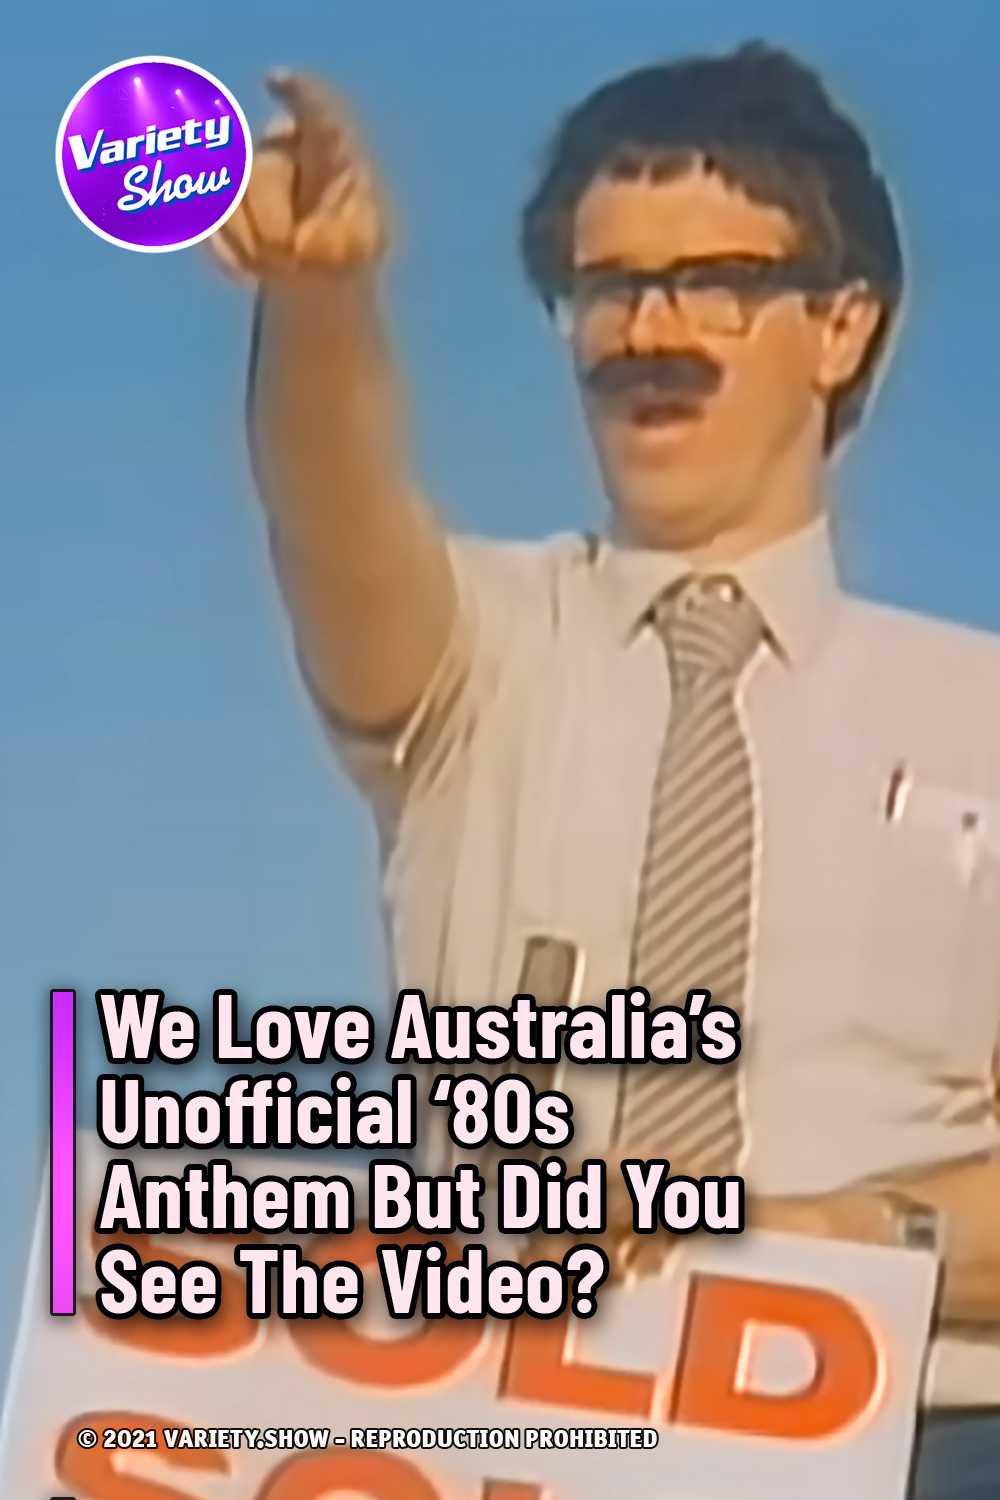 We Love Australia’s Unofficial ‘80s Anthem But Did You See The Video?